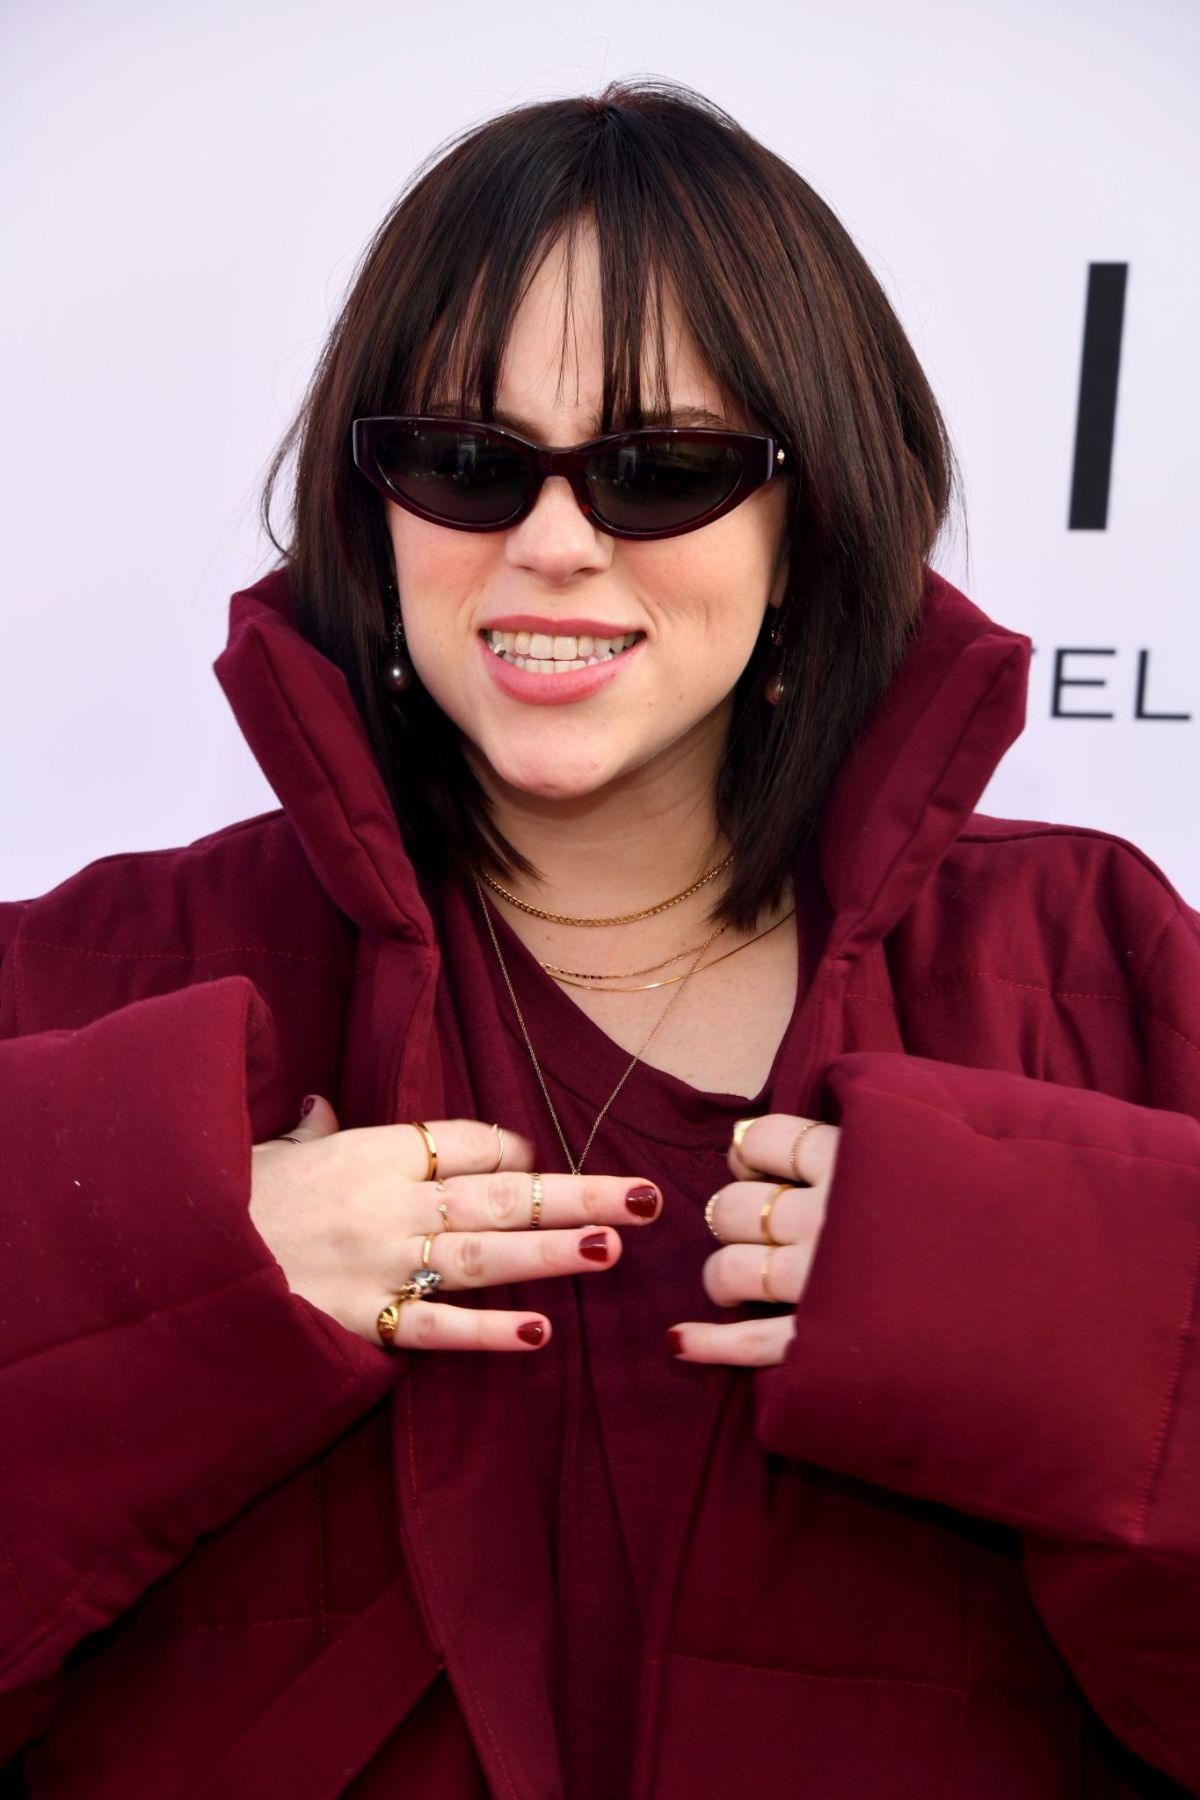 BILLIE EILISH at Variety’s Hitmakers Brunch in Los Angeles 12/04/2021 ...